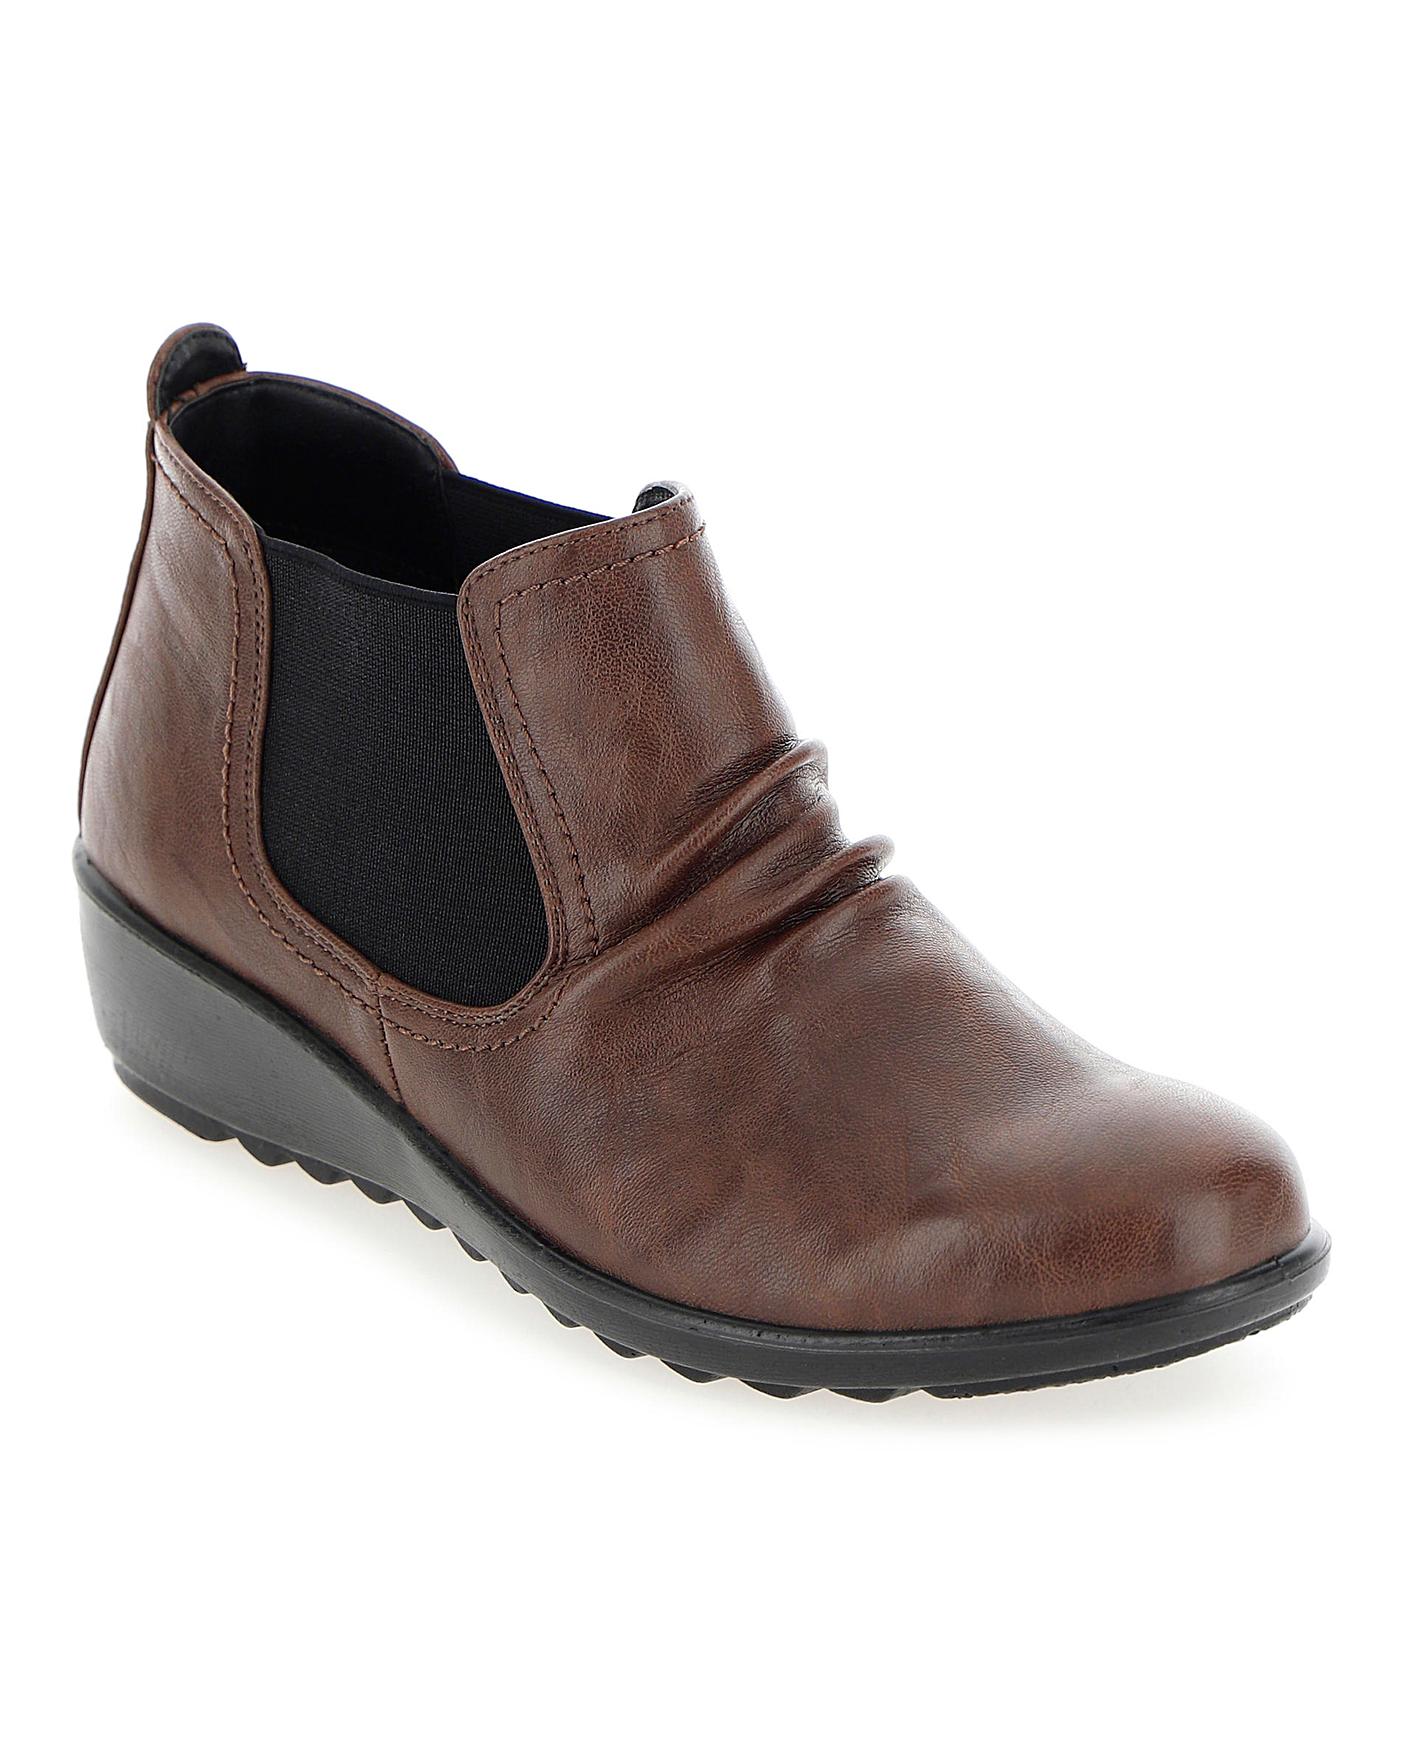 Cushion Walk Chelsea Boots EEE Fit | Crazy Clearance